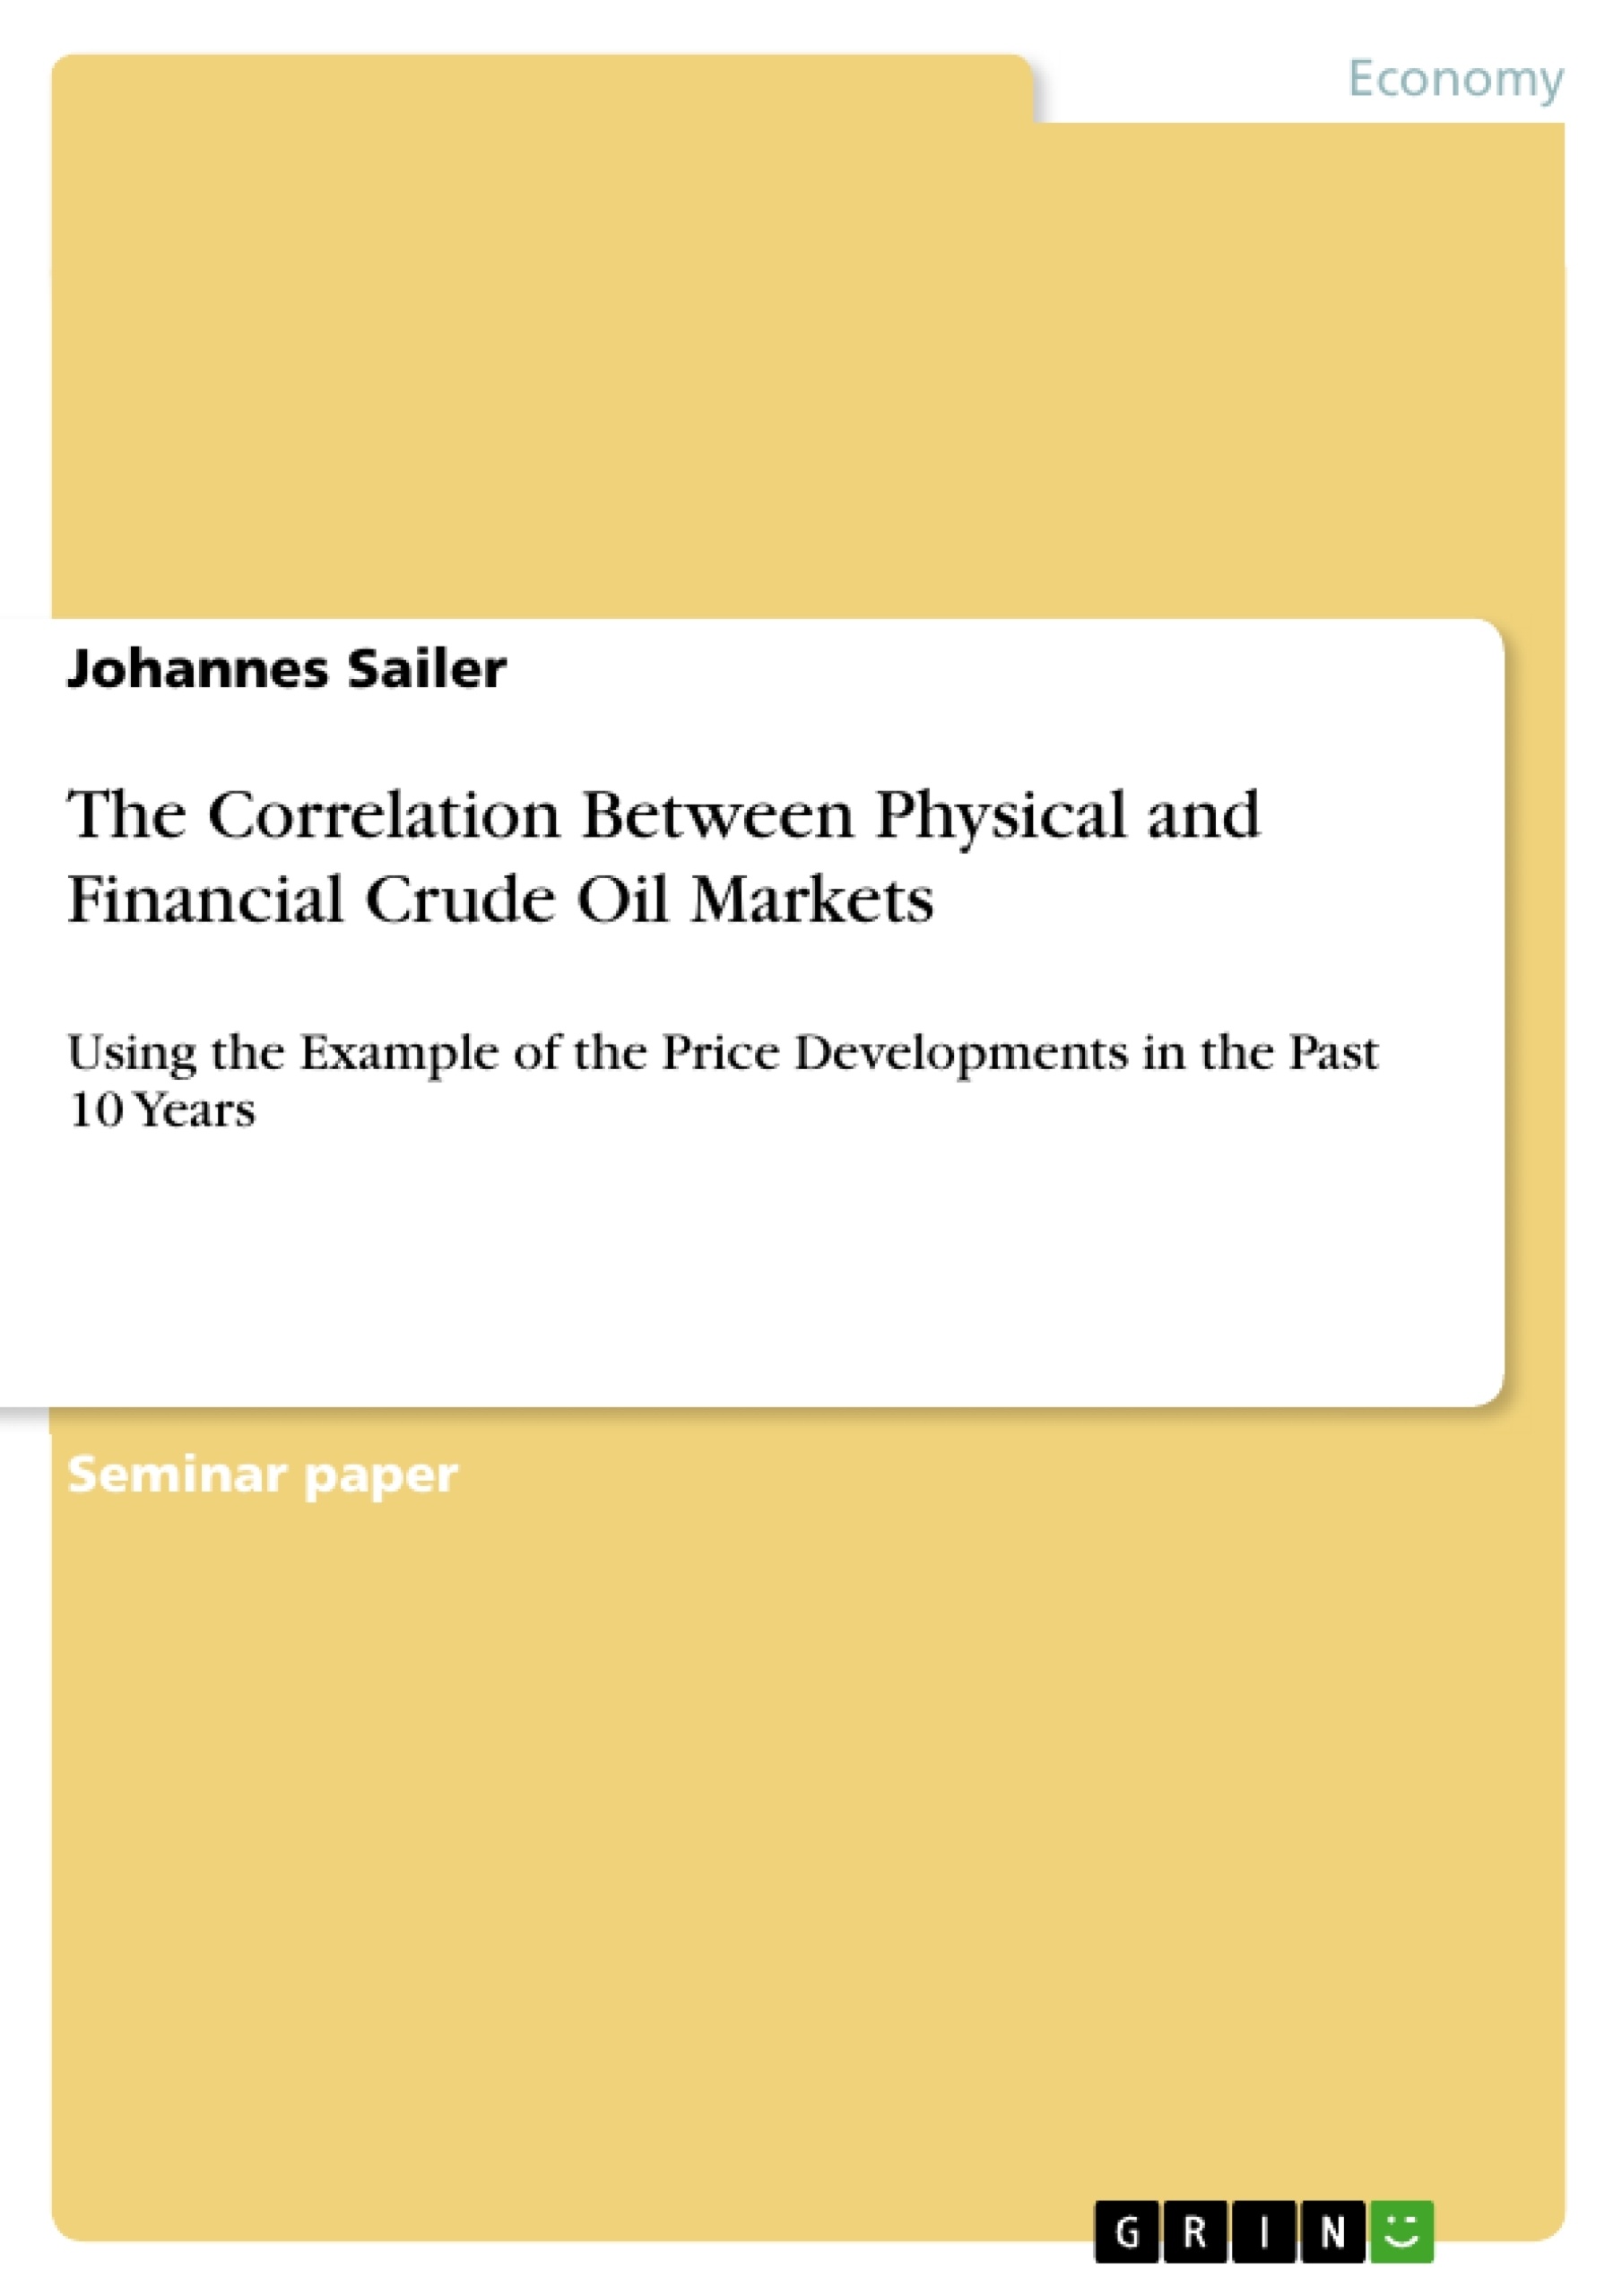 Título: The Correlation Between Physical and Financial Crude Oil Markets